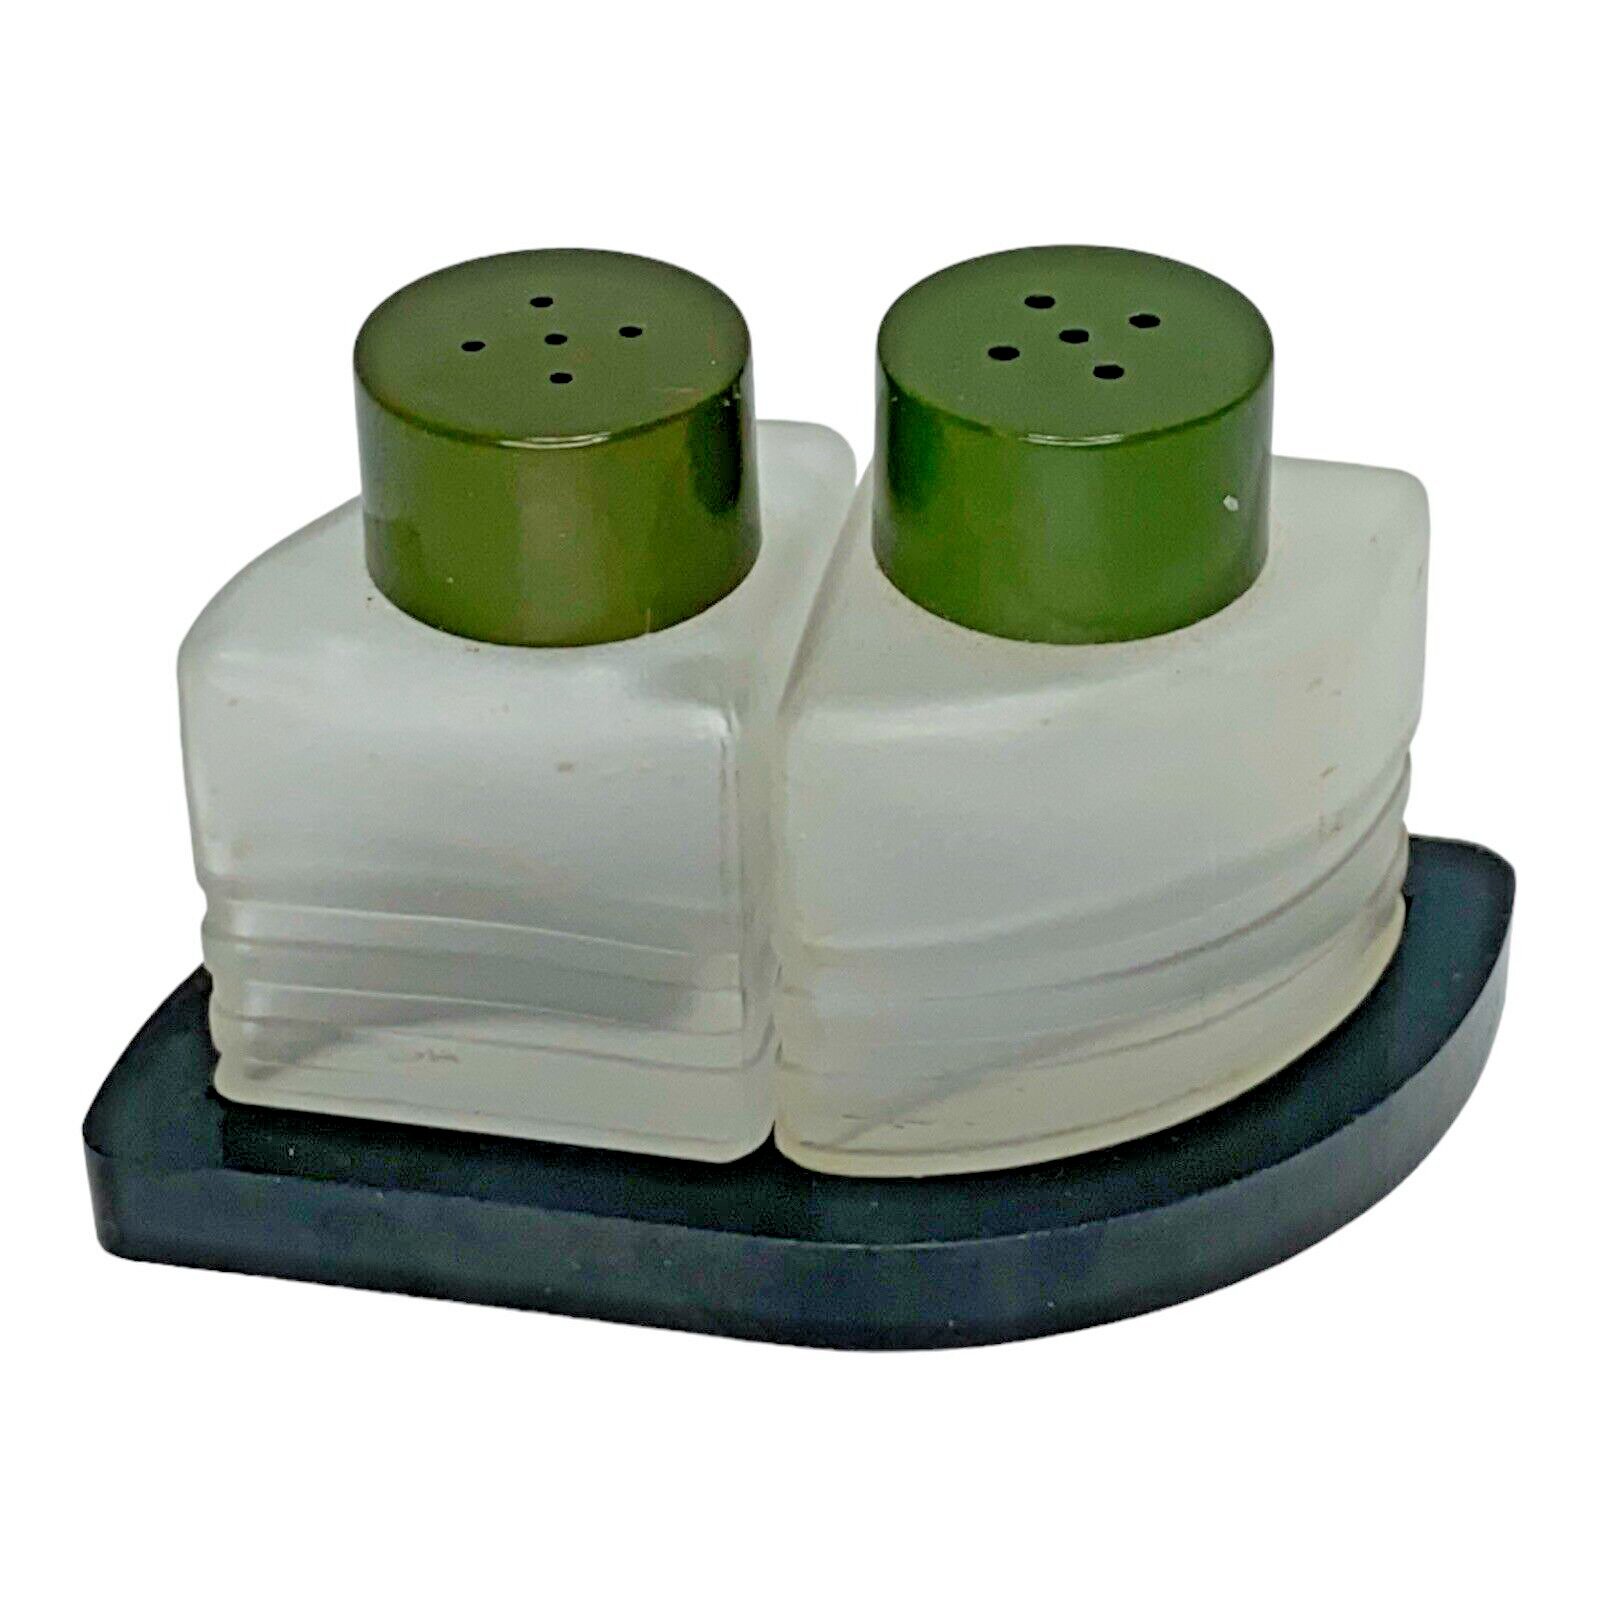 Art Deco Frosted Glass Lettuce Green Top Small Vintage Salt Pepper Shakers Caddy